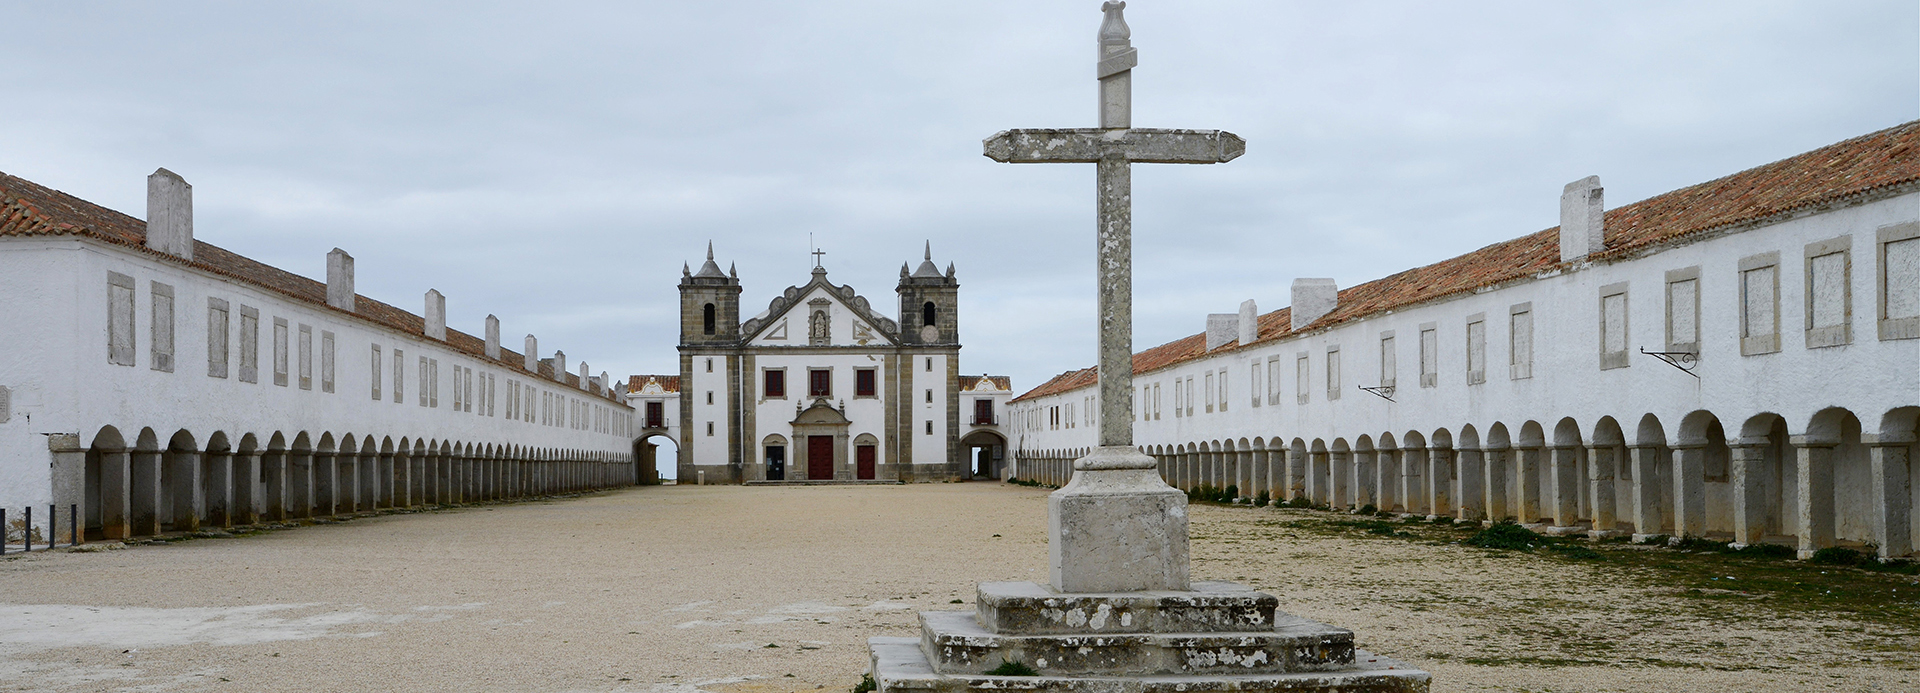 Desirable Portugal Tours